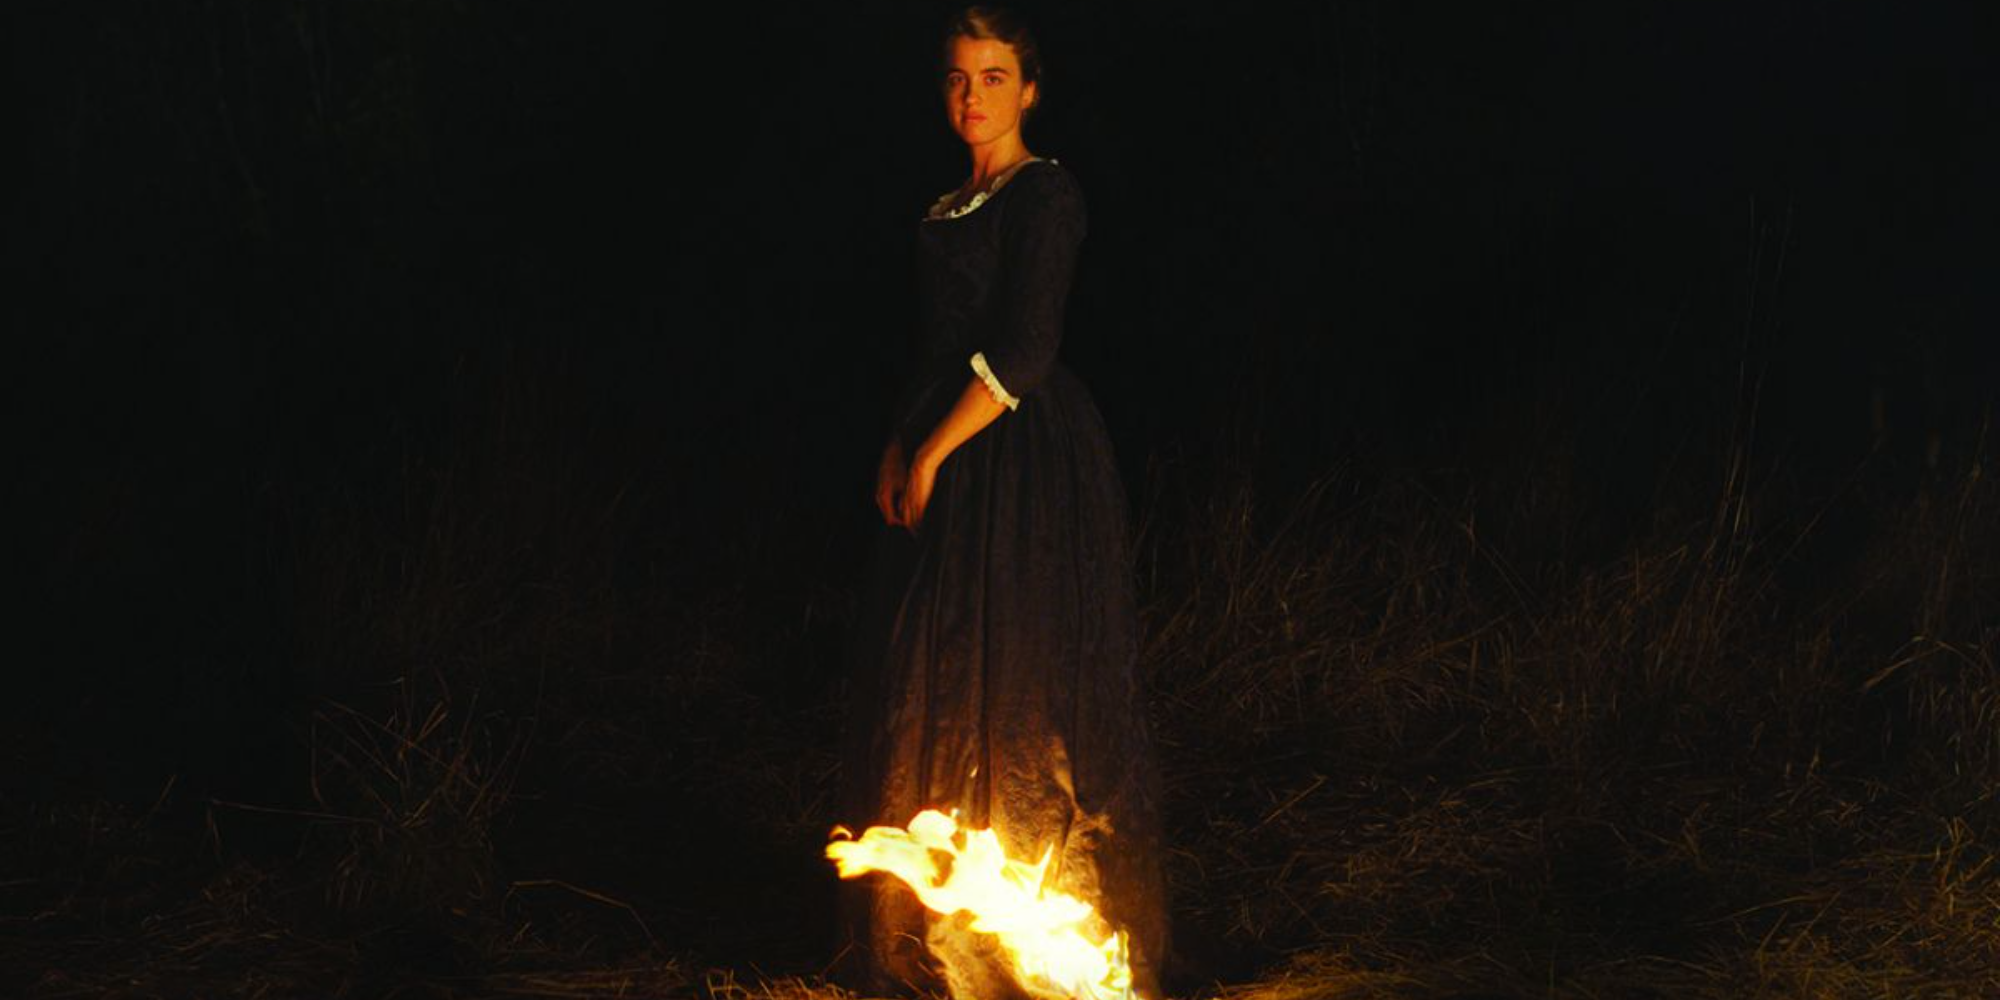 portaitofaladyonfire heloise stands in front of a fire as she is being drawn